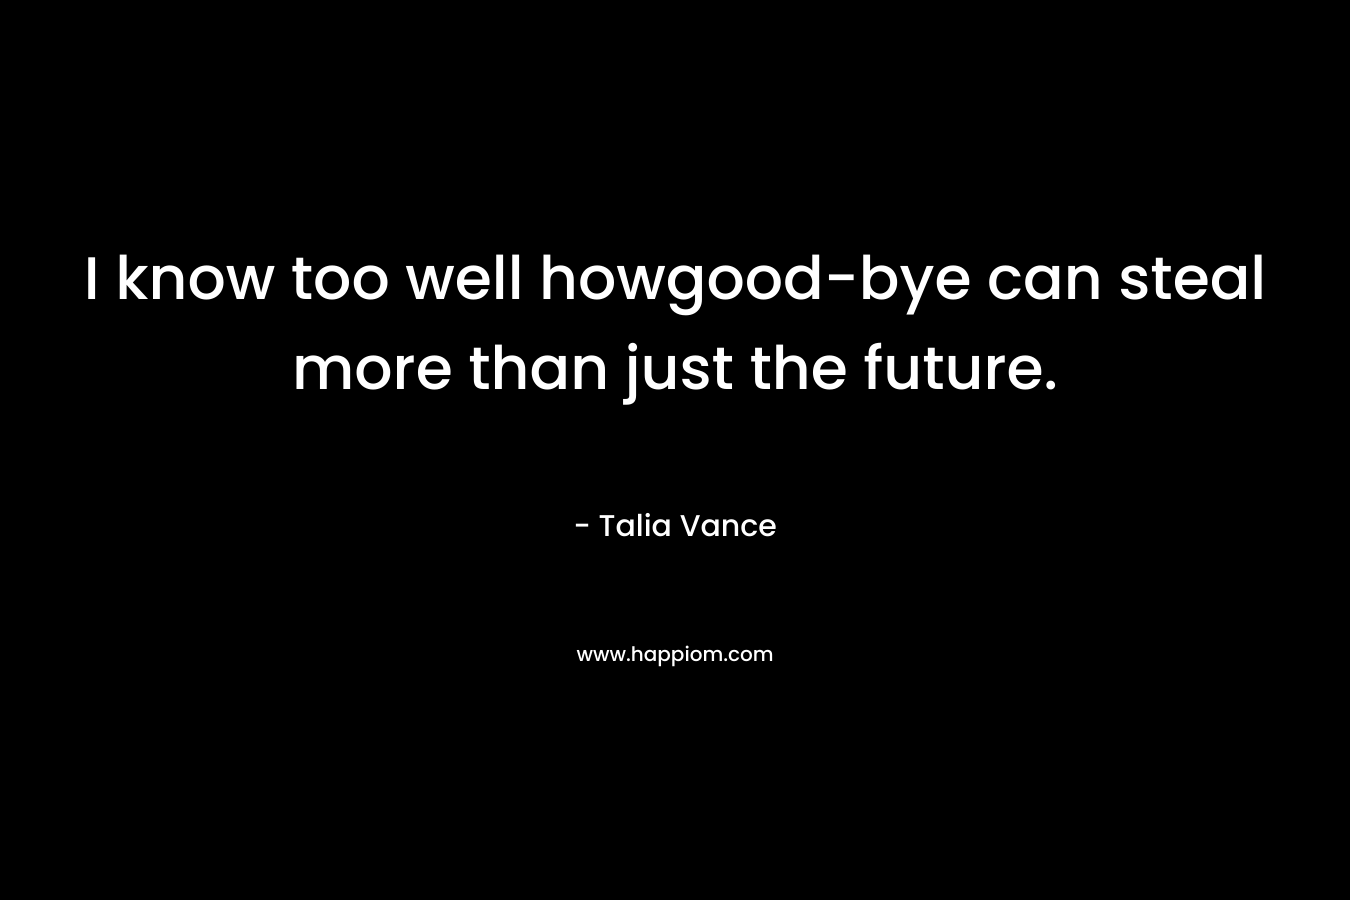 I know too well howgood-bye can steal more than just the future. – Talia Vance